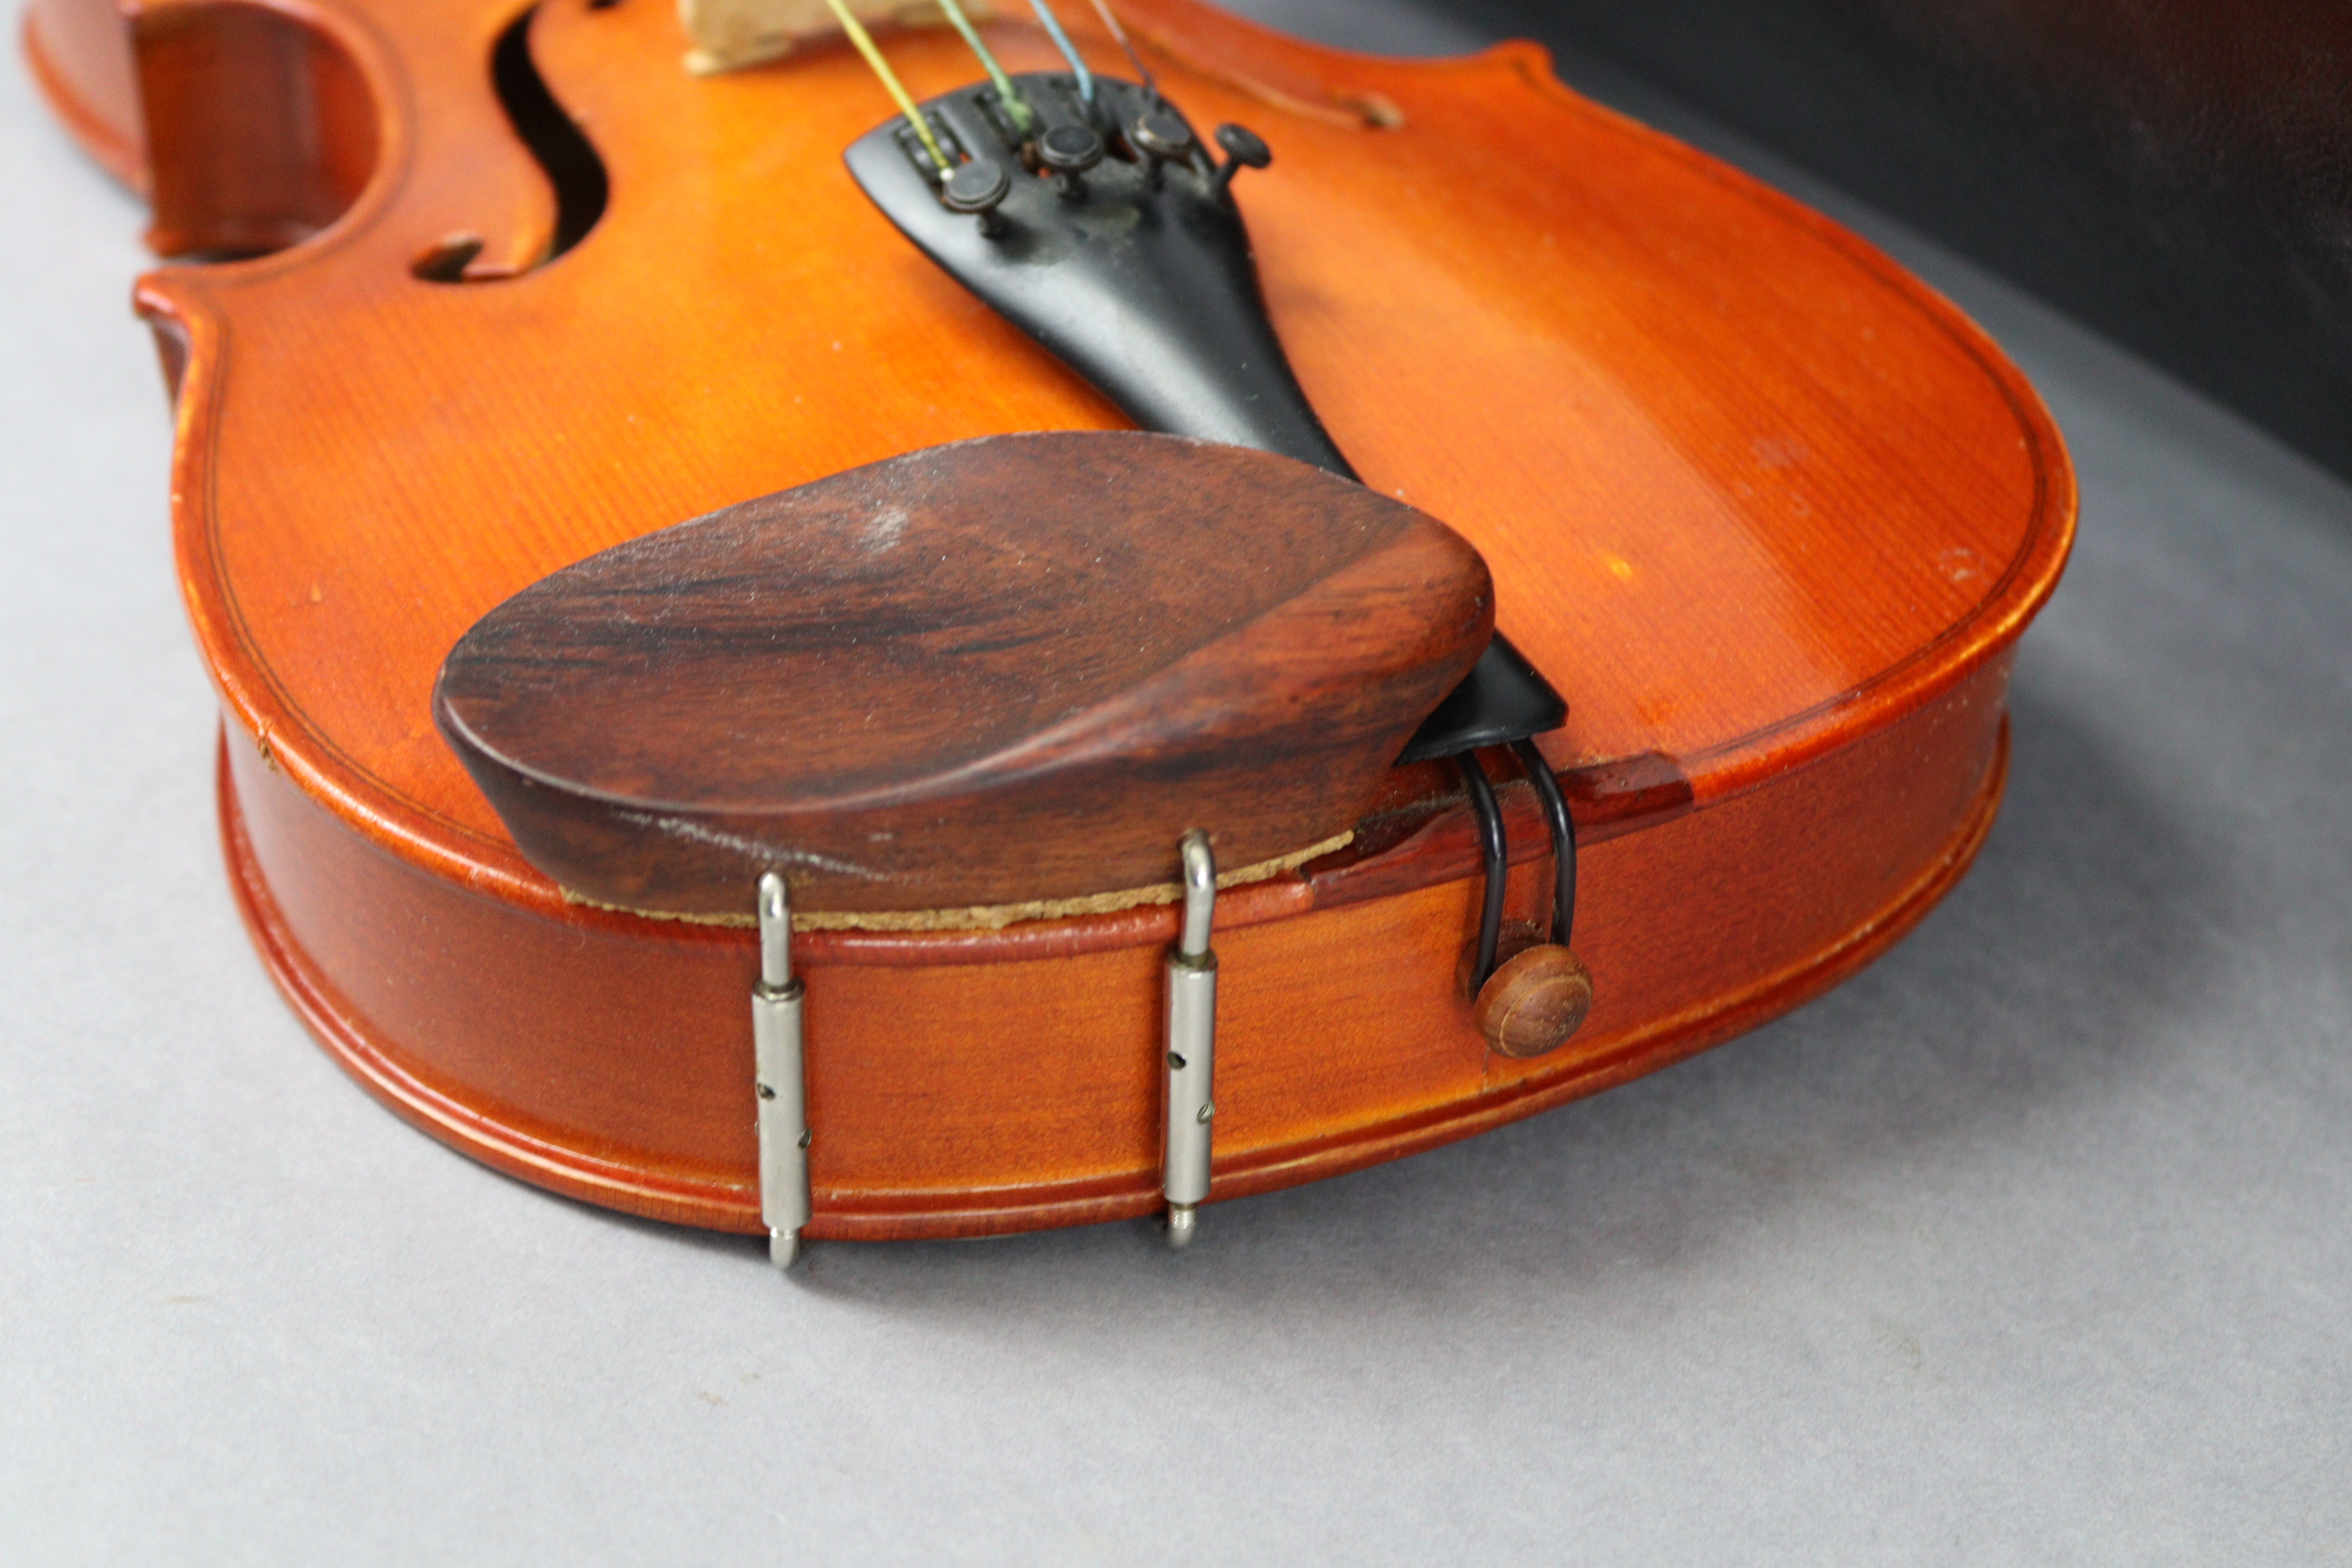 A “Stentor Student” violin & bow by Stentor Music of England, 24” long, with case. - Image 7 of 8